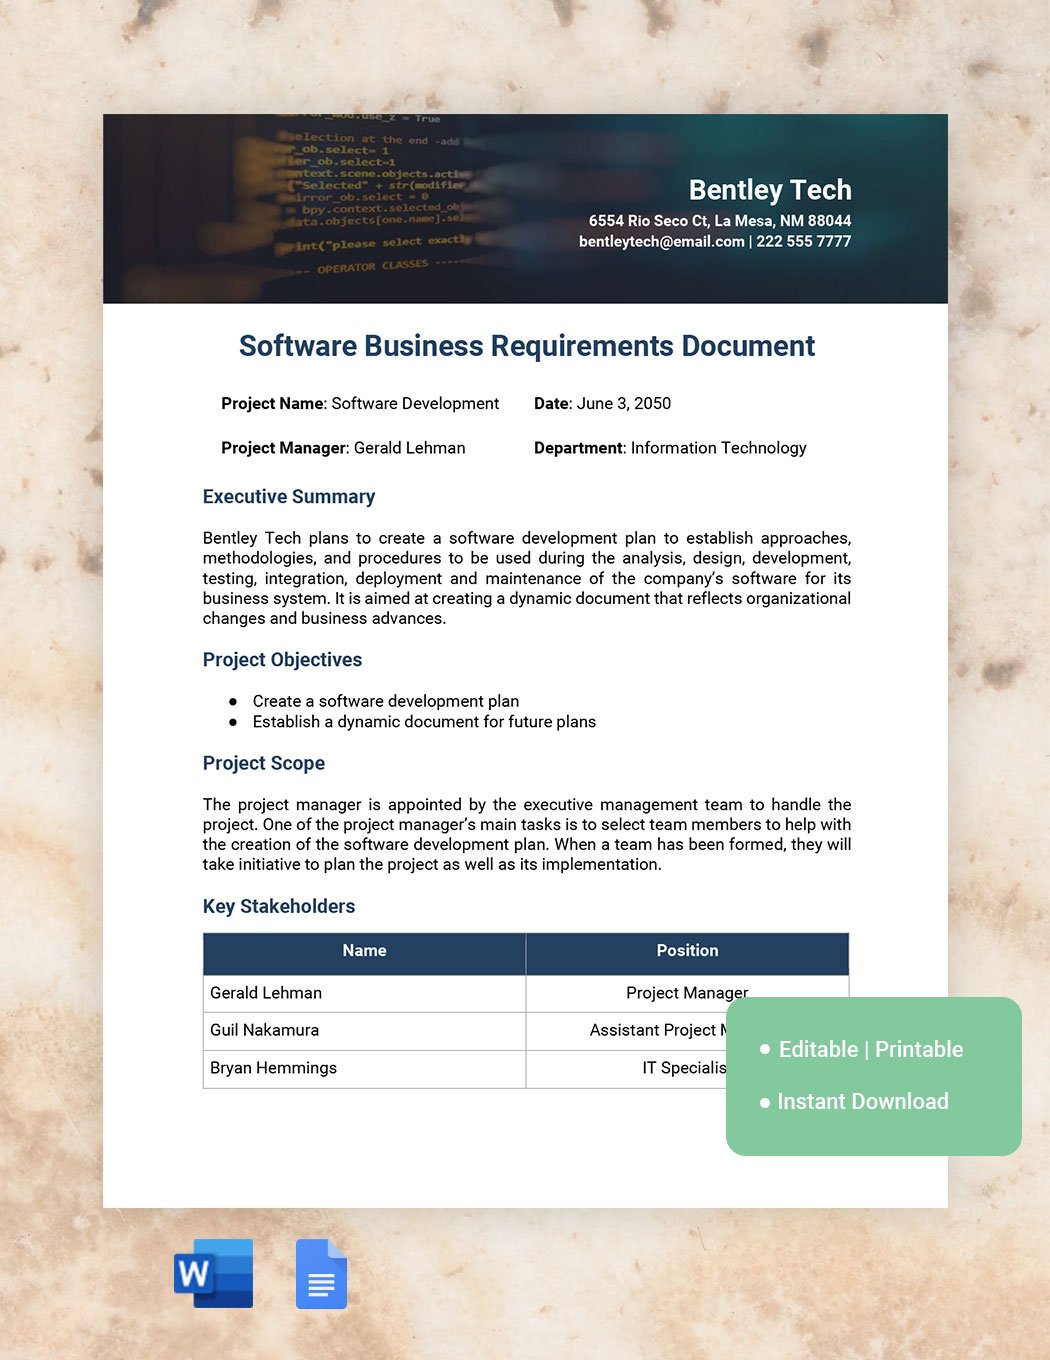 Software Business Requirements Document Template